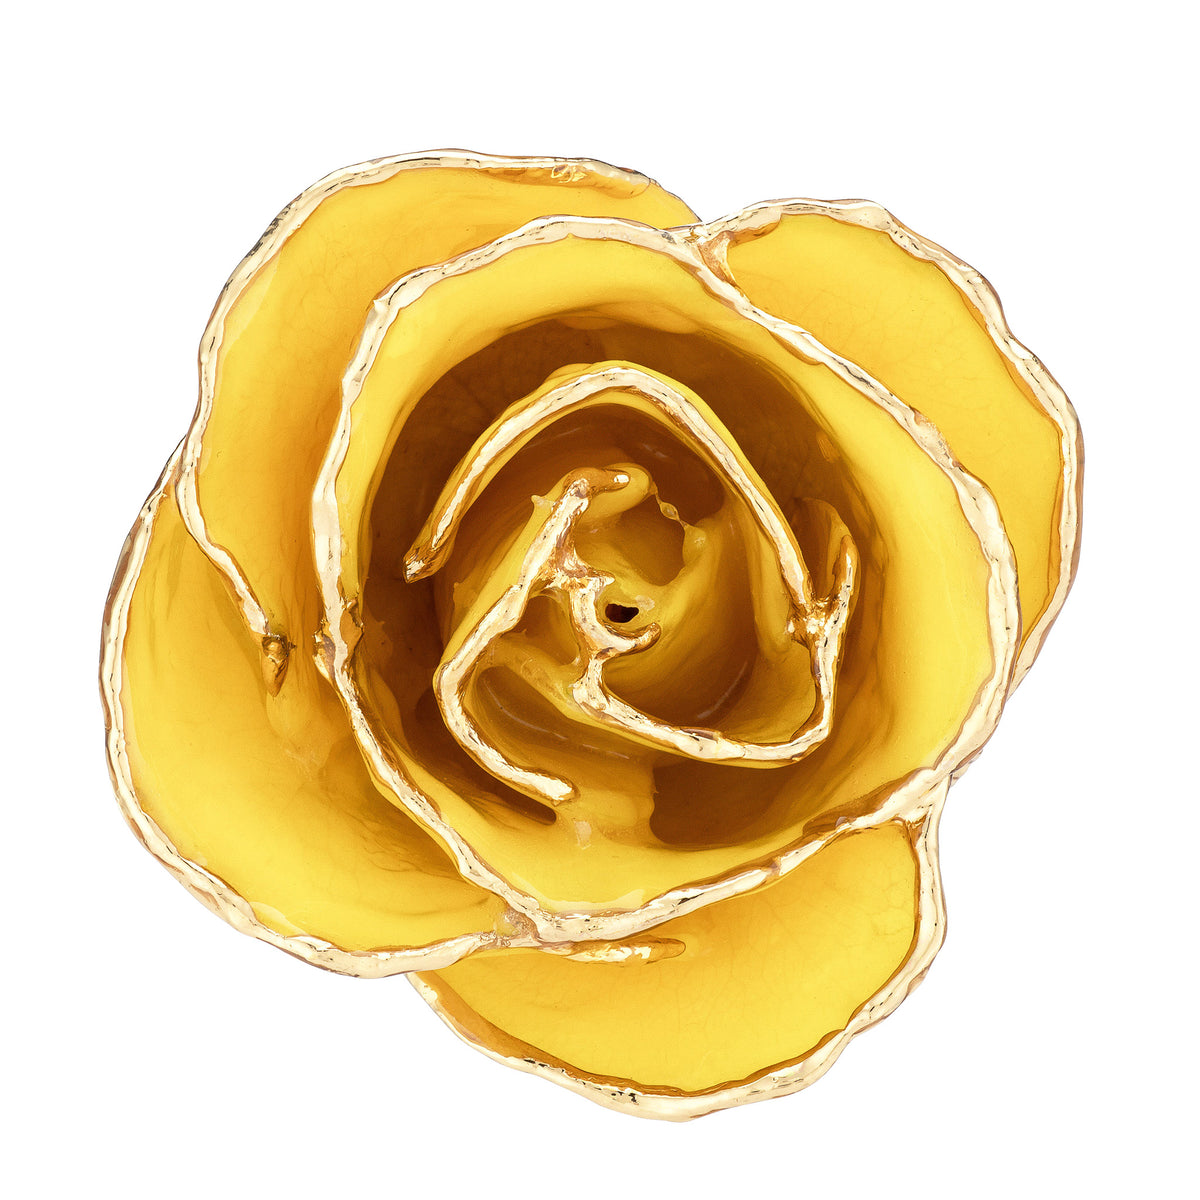 24K Gold Trimmed Forever Rose with Yellow Petals. View of Stem, Leaves, and Rose Petals and Showing Detail of Gold Trim View from top